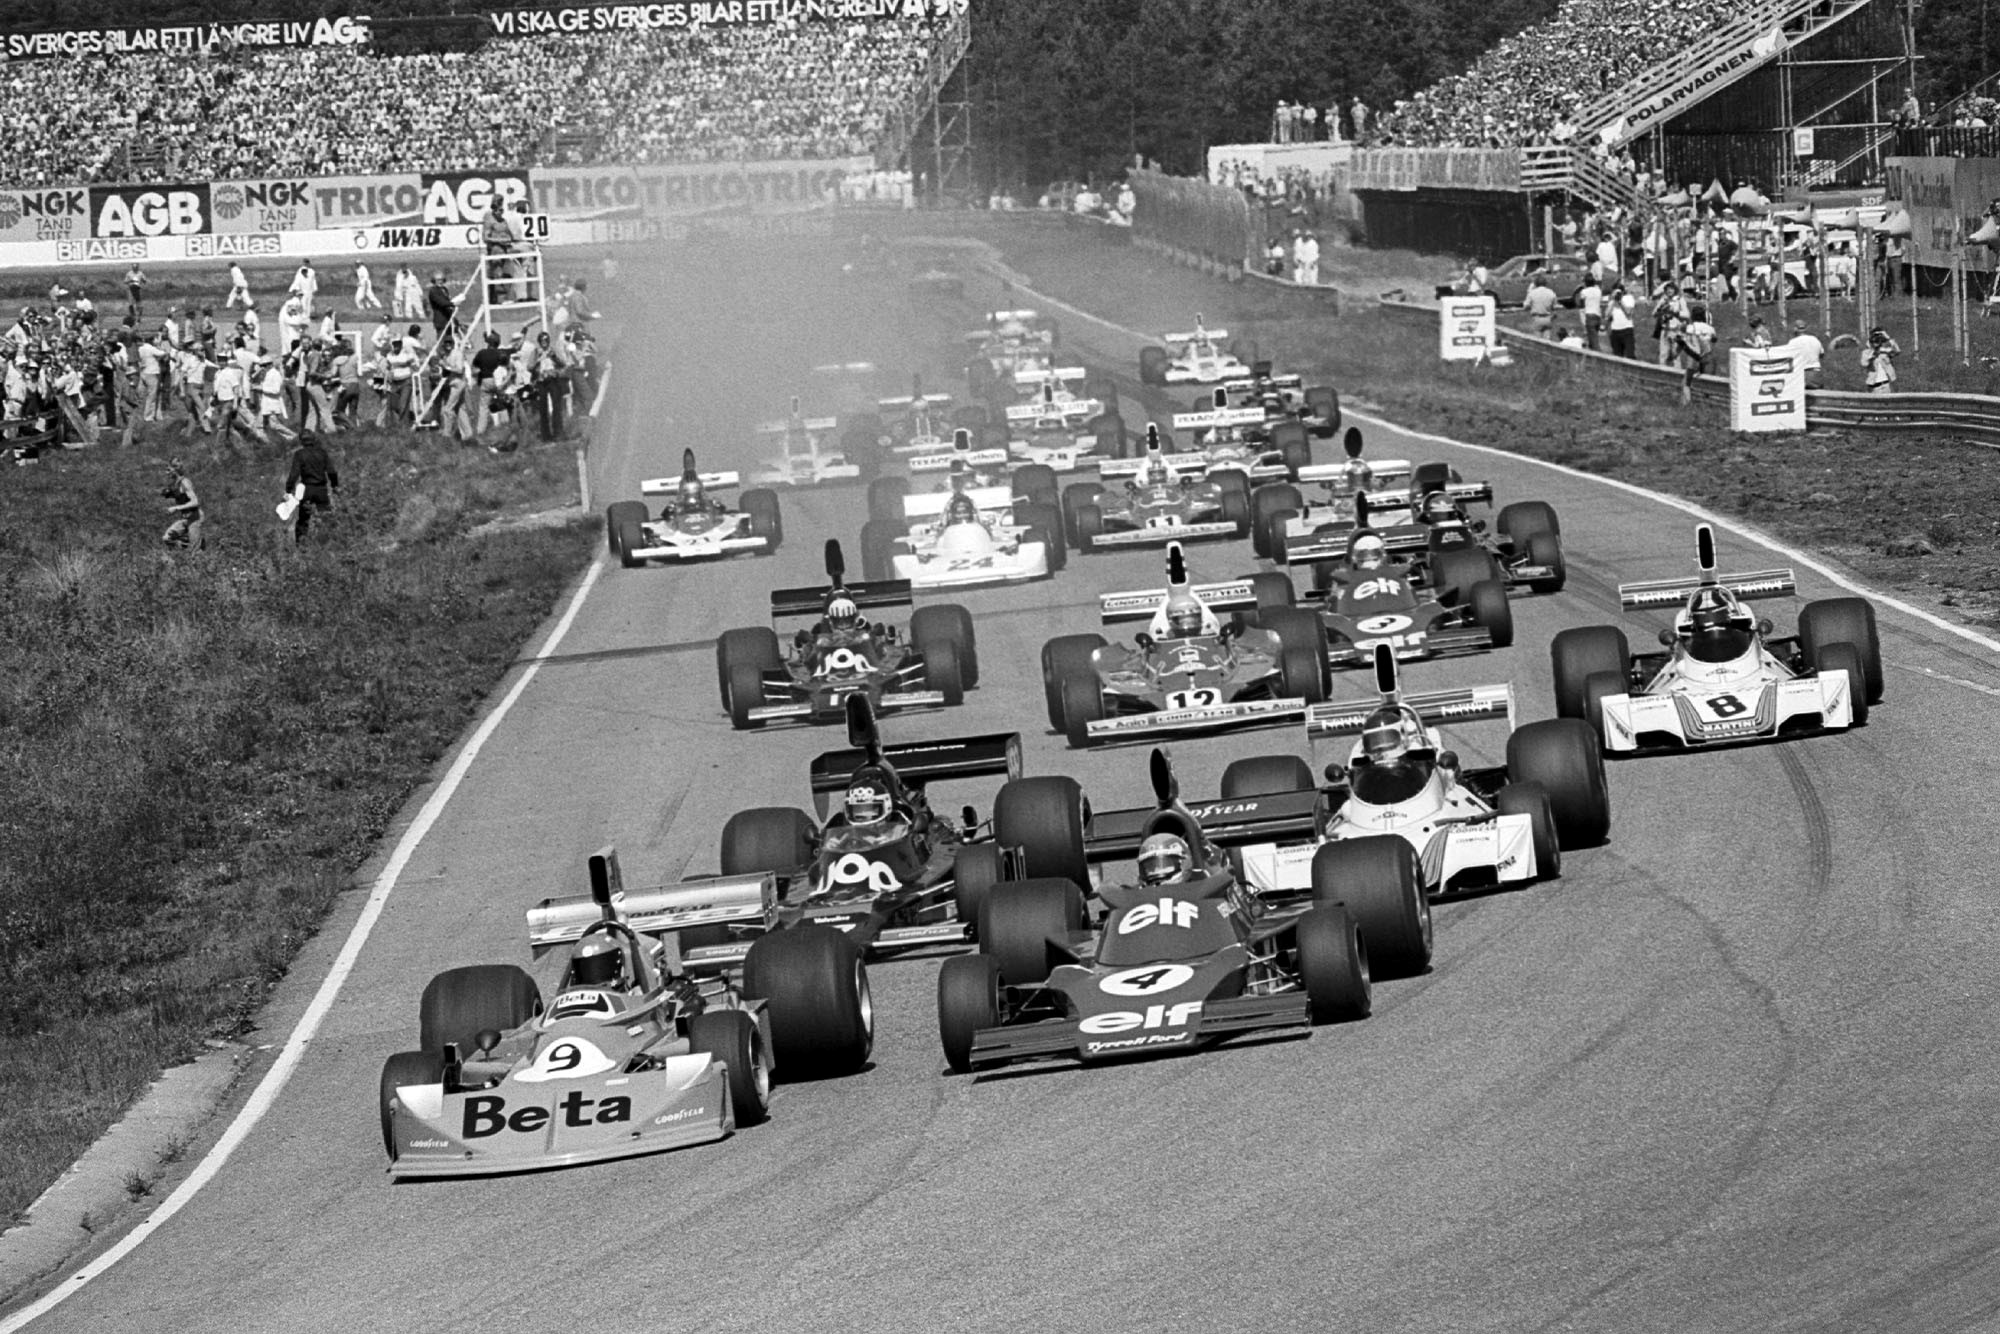 A F1 race at Anderstorp.